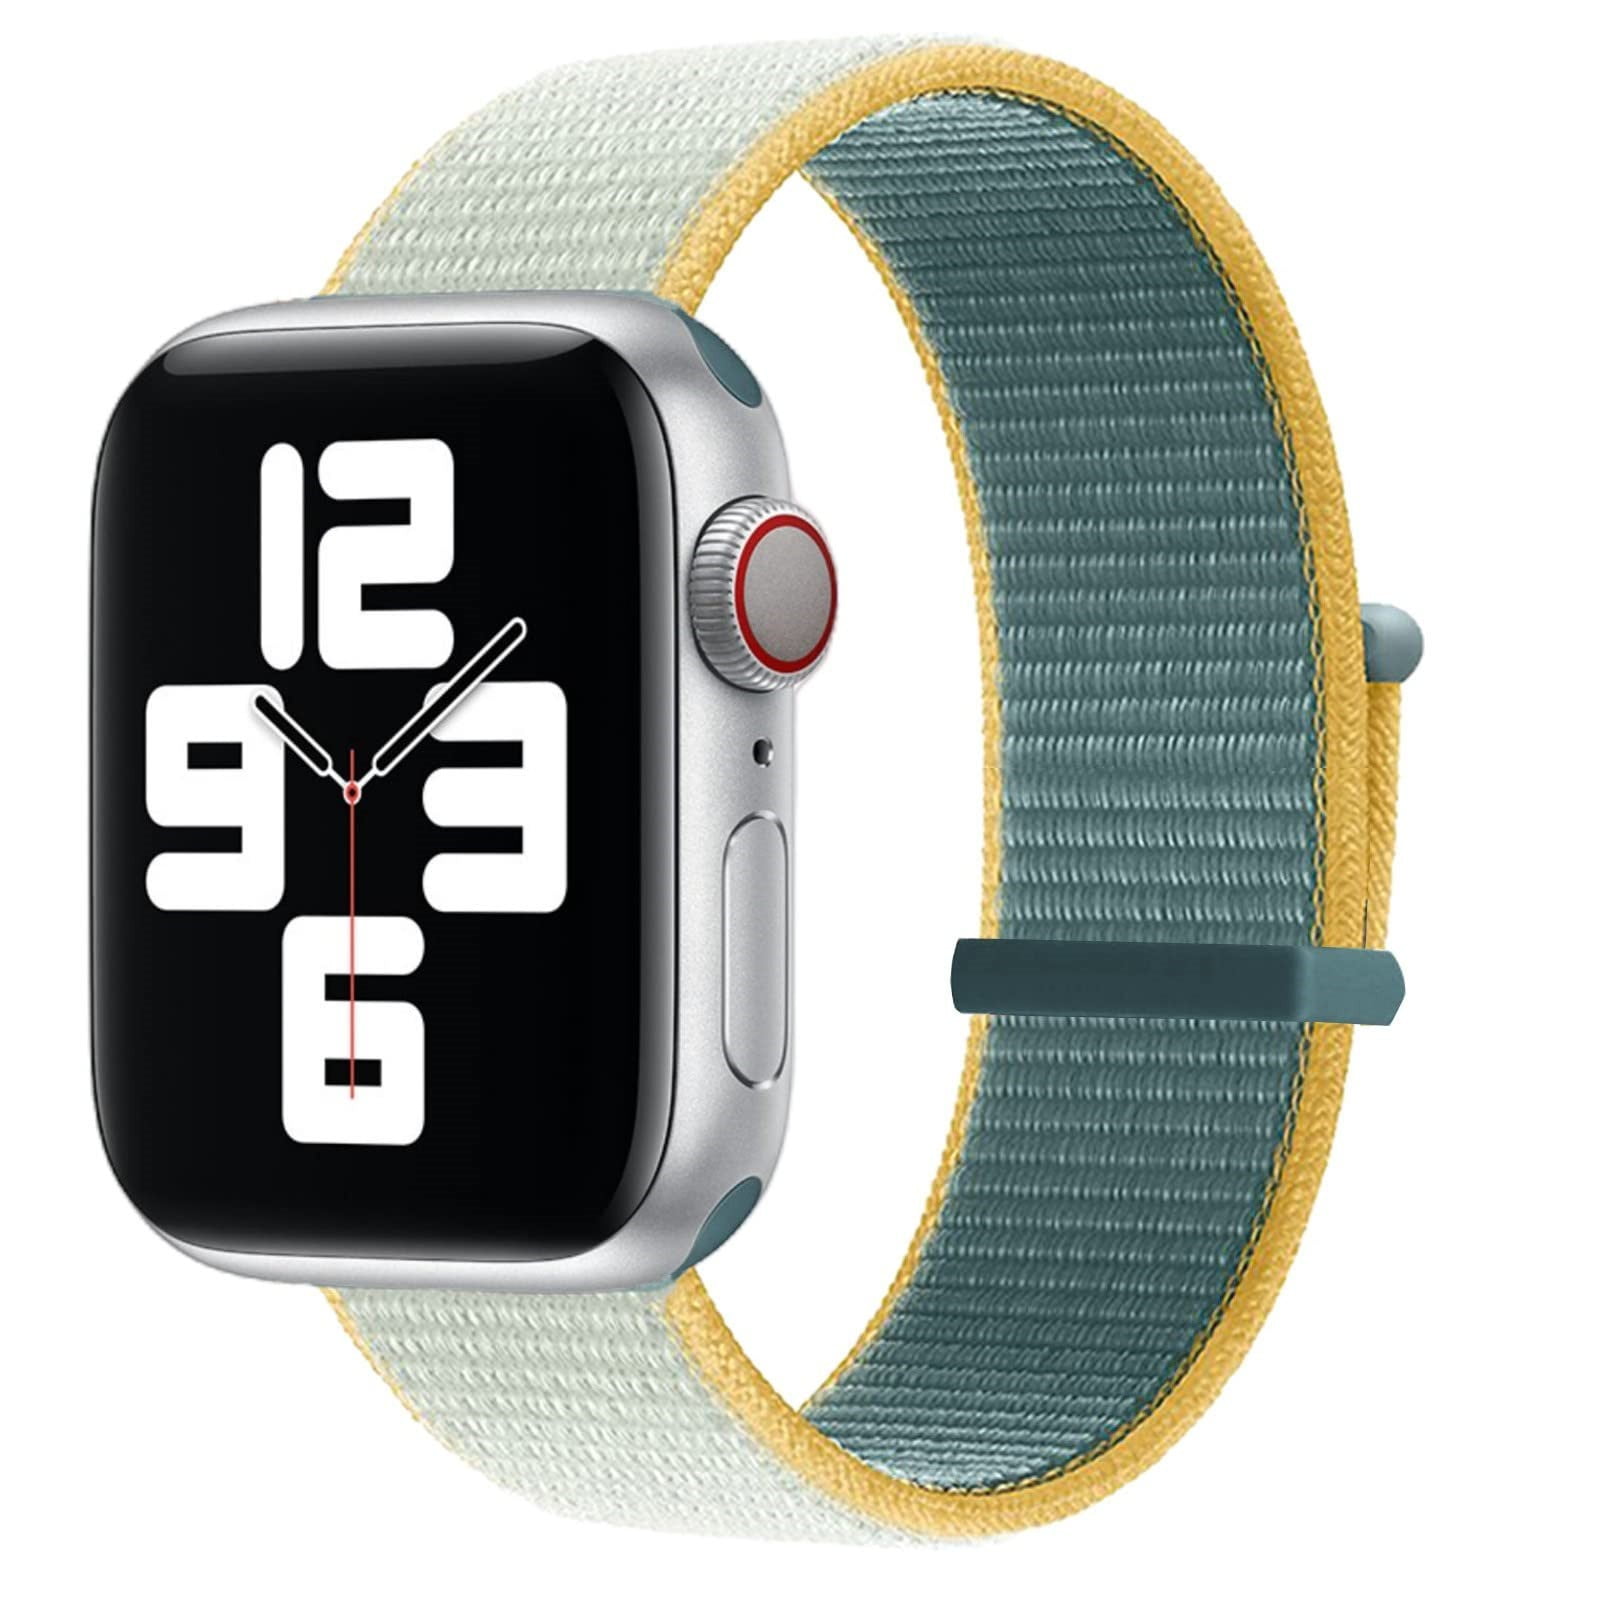 Yepband Milanese Loop Band Compatible with Apple Watch Bands 40mm